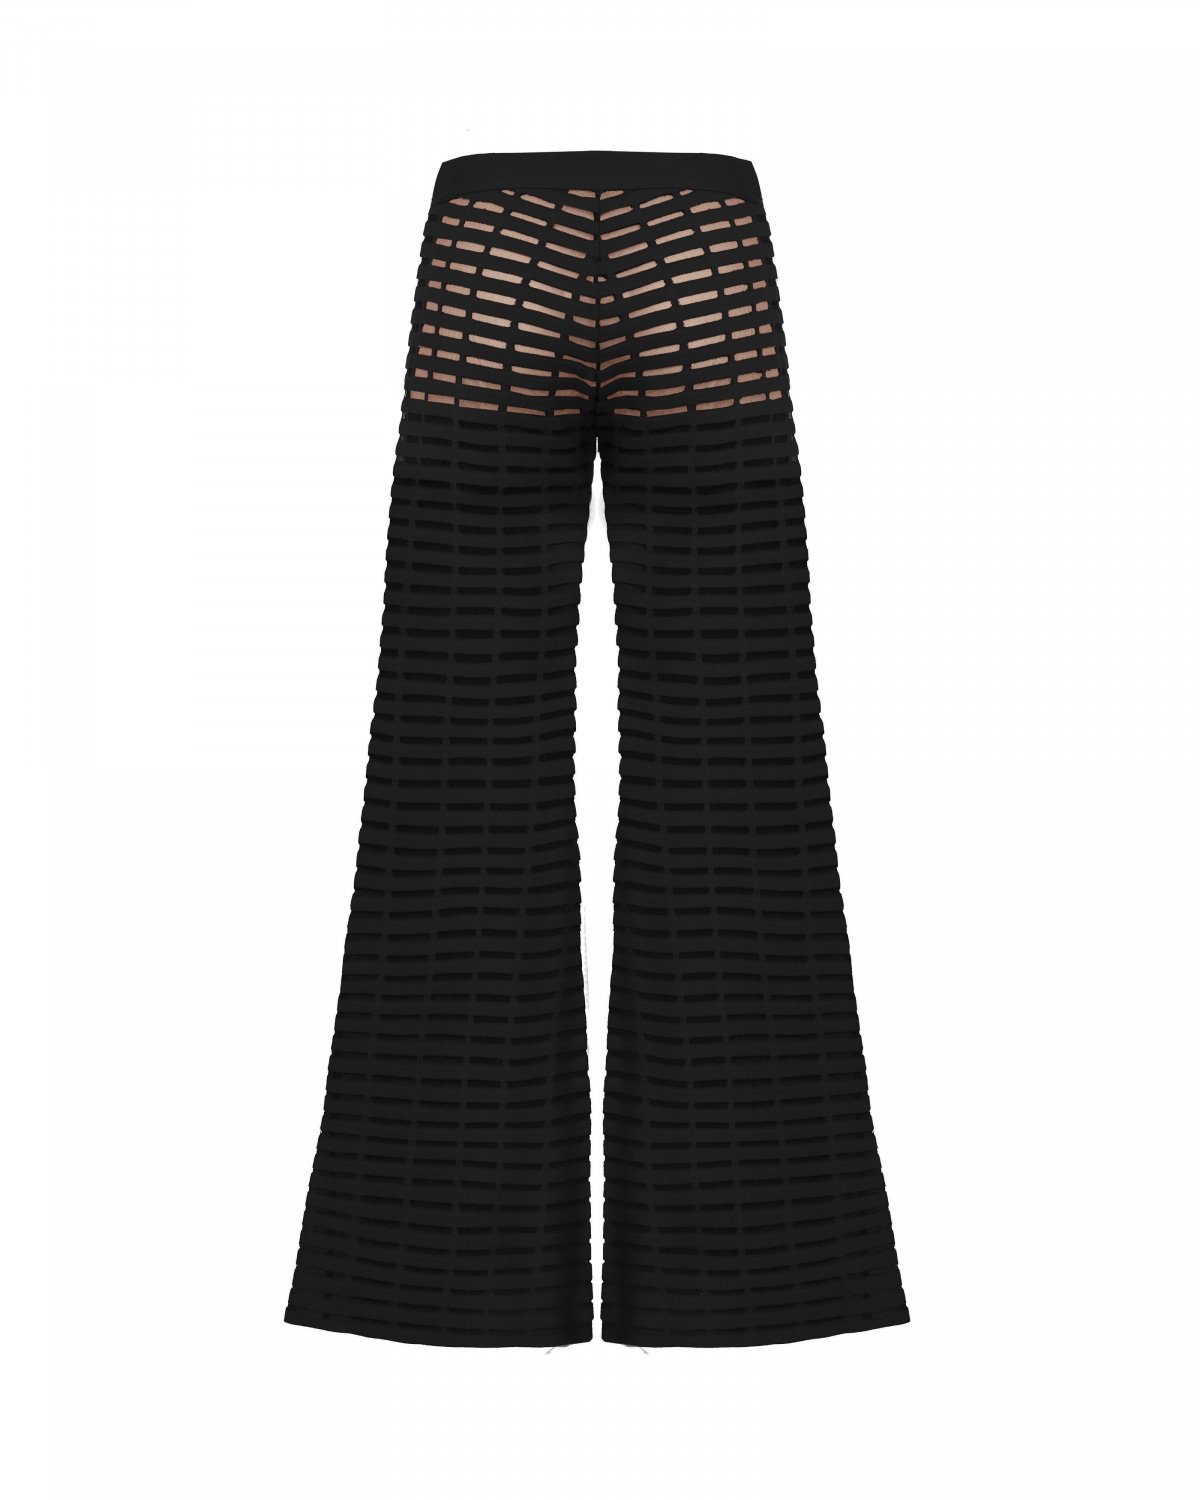 Black open-knit pants | Iconic Capsule Collection, 73_74 | Genny